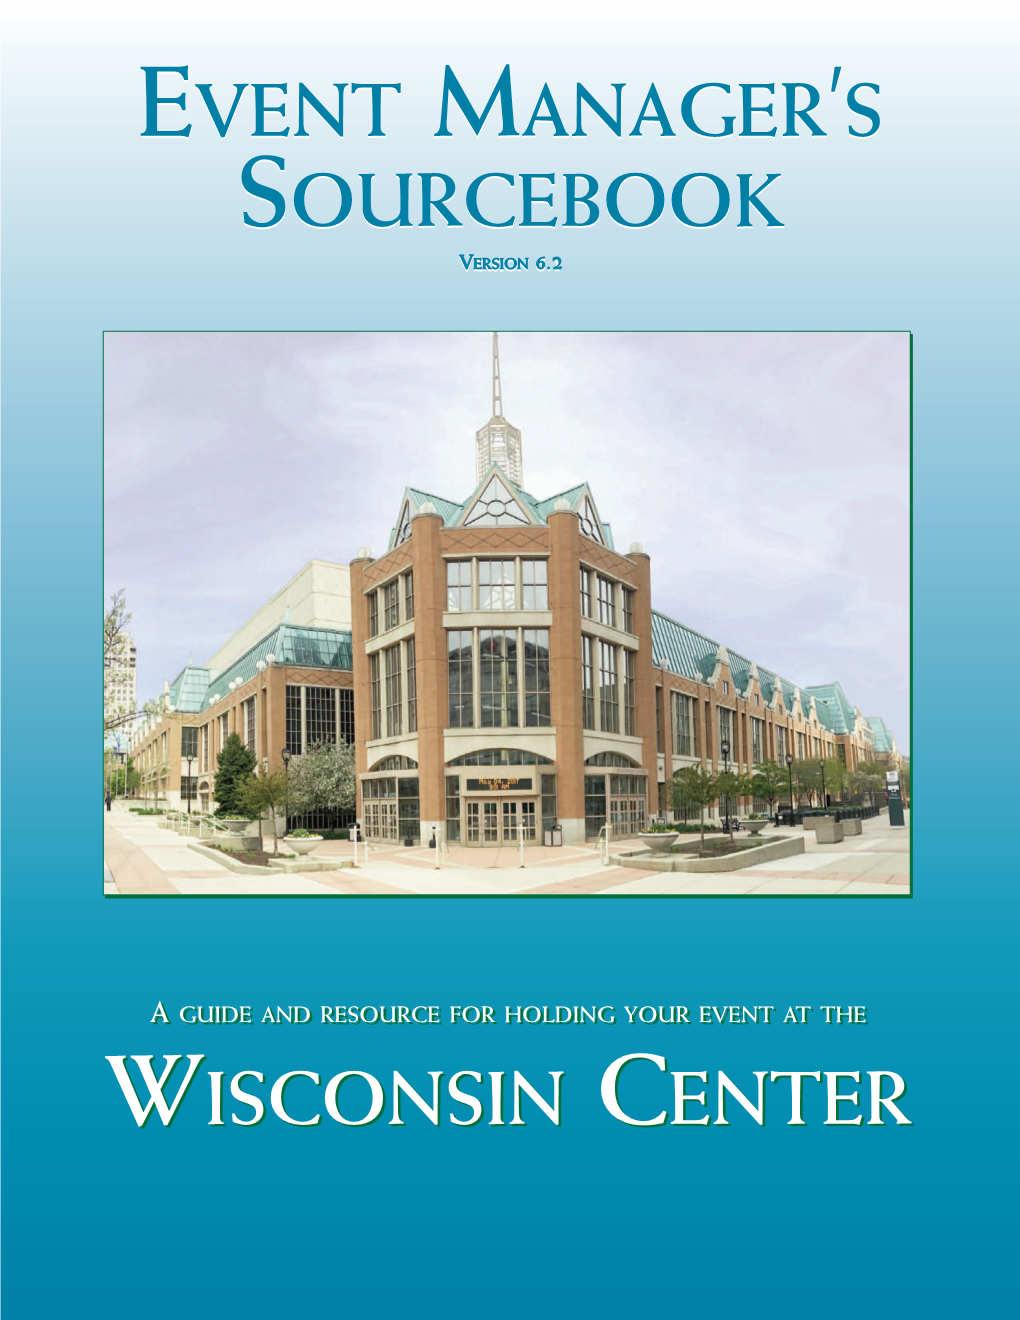 Wisconsin Center Event Manager's Sourcebook